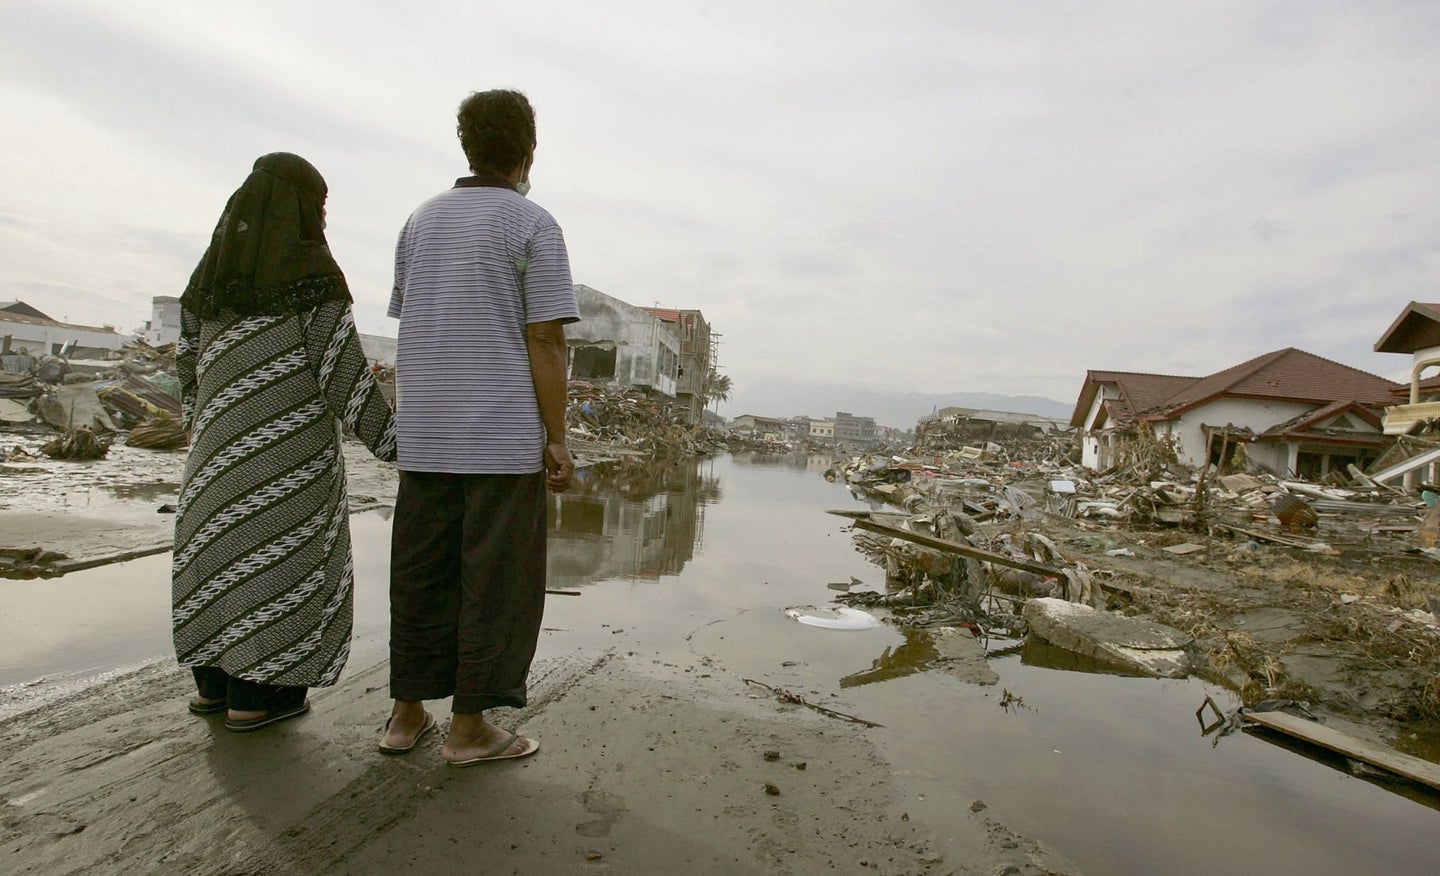 A woman and man in Indonesia view the destruction from a tsunami.